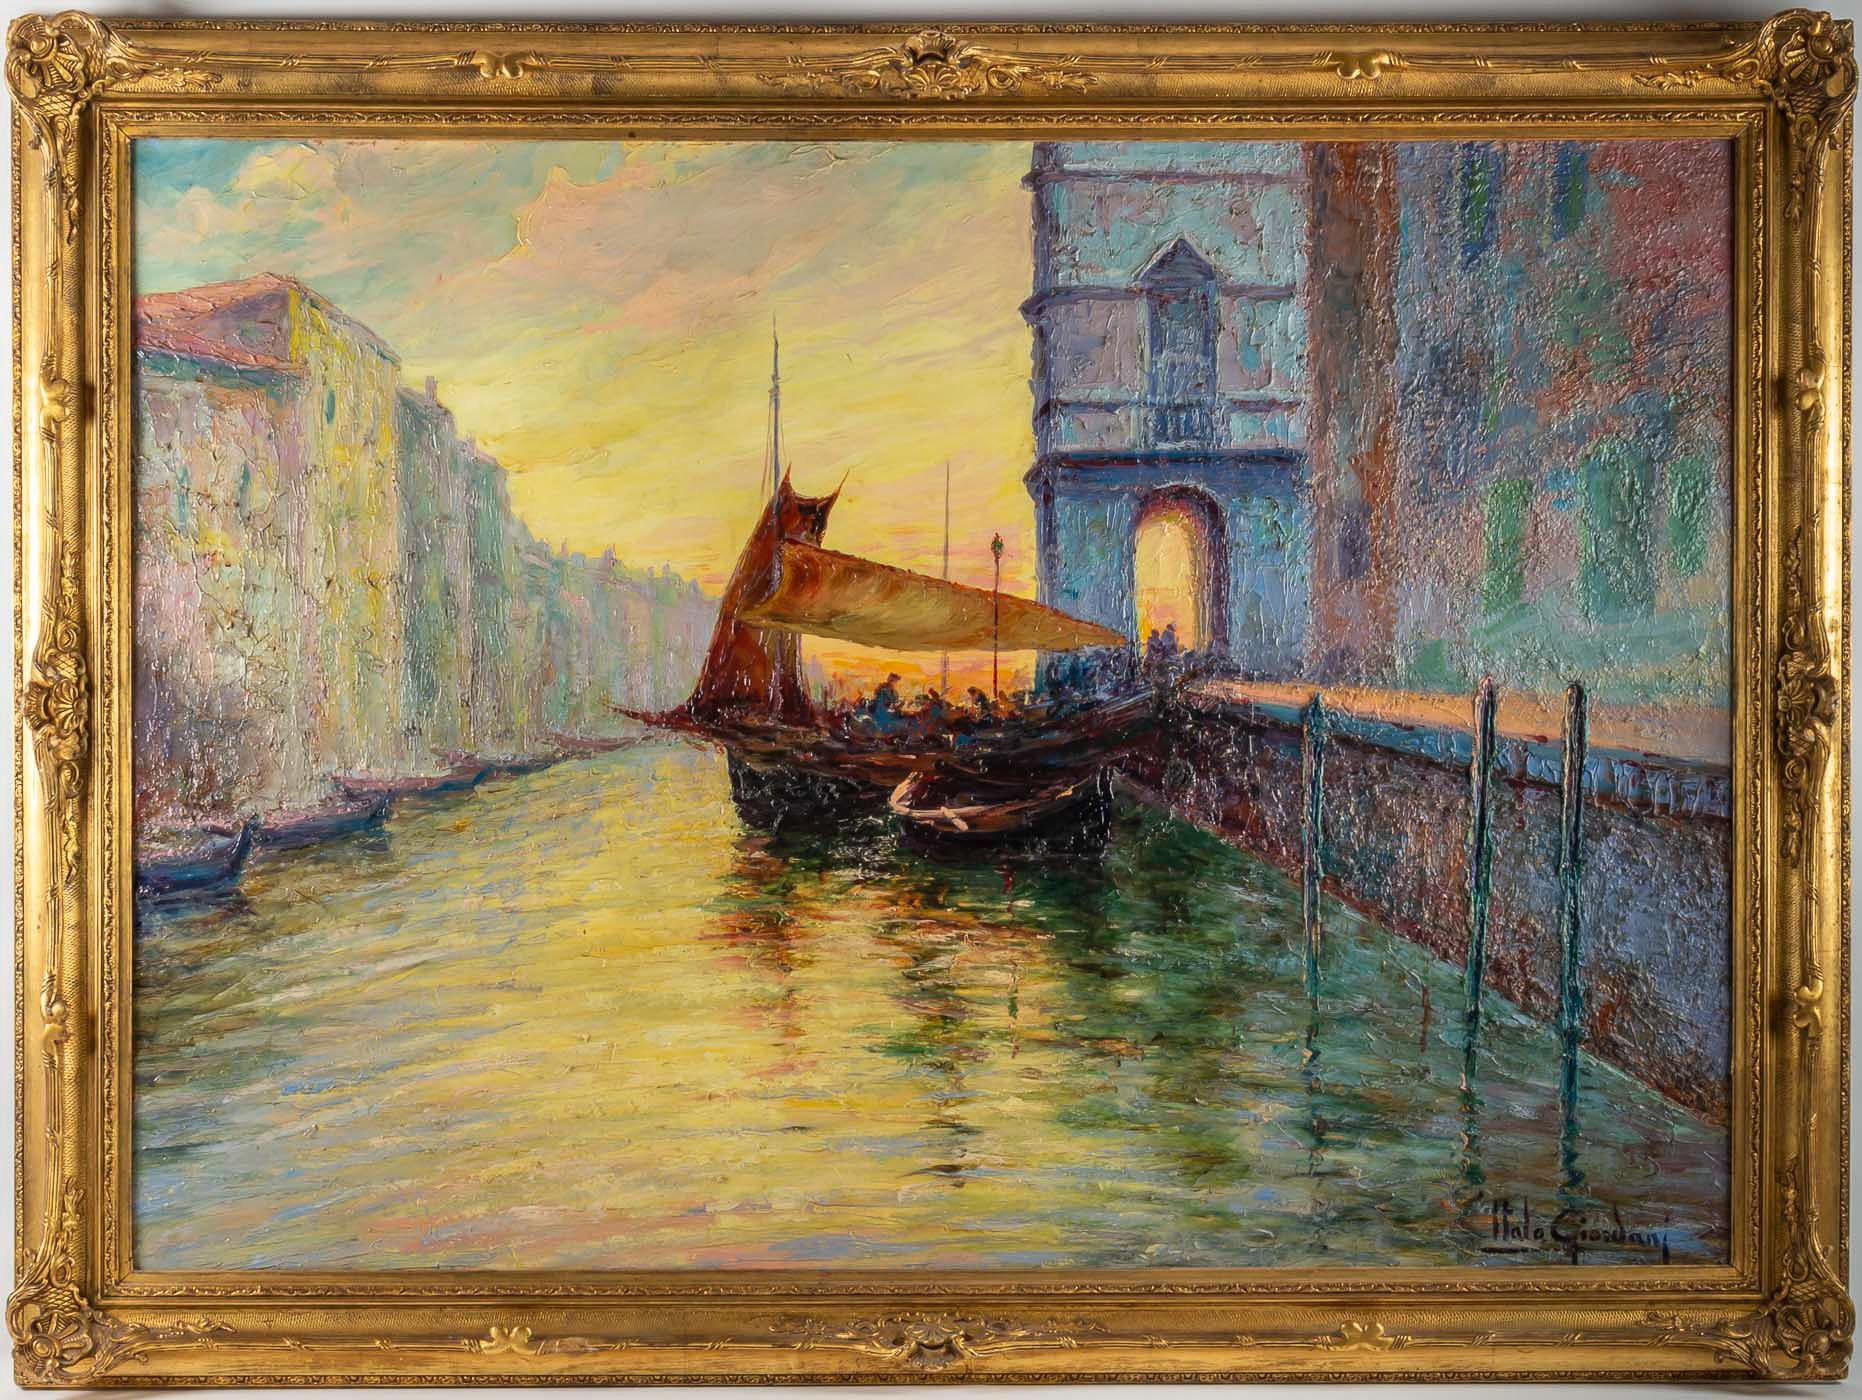 Italo Giordani oil on panel Dusk Venice view, circa 1900.

A fascinating painting, depicting Dusk Venice View, sign in lower right by Italo Giordani in 1900.
Original frame. Our painting is in excellent original condition.

Measurements